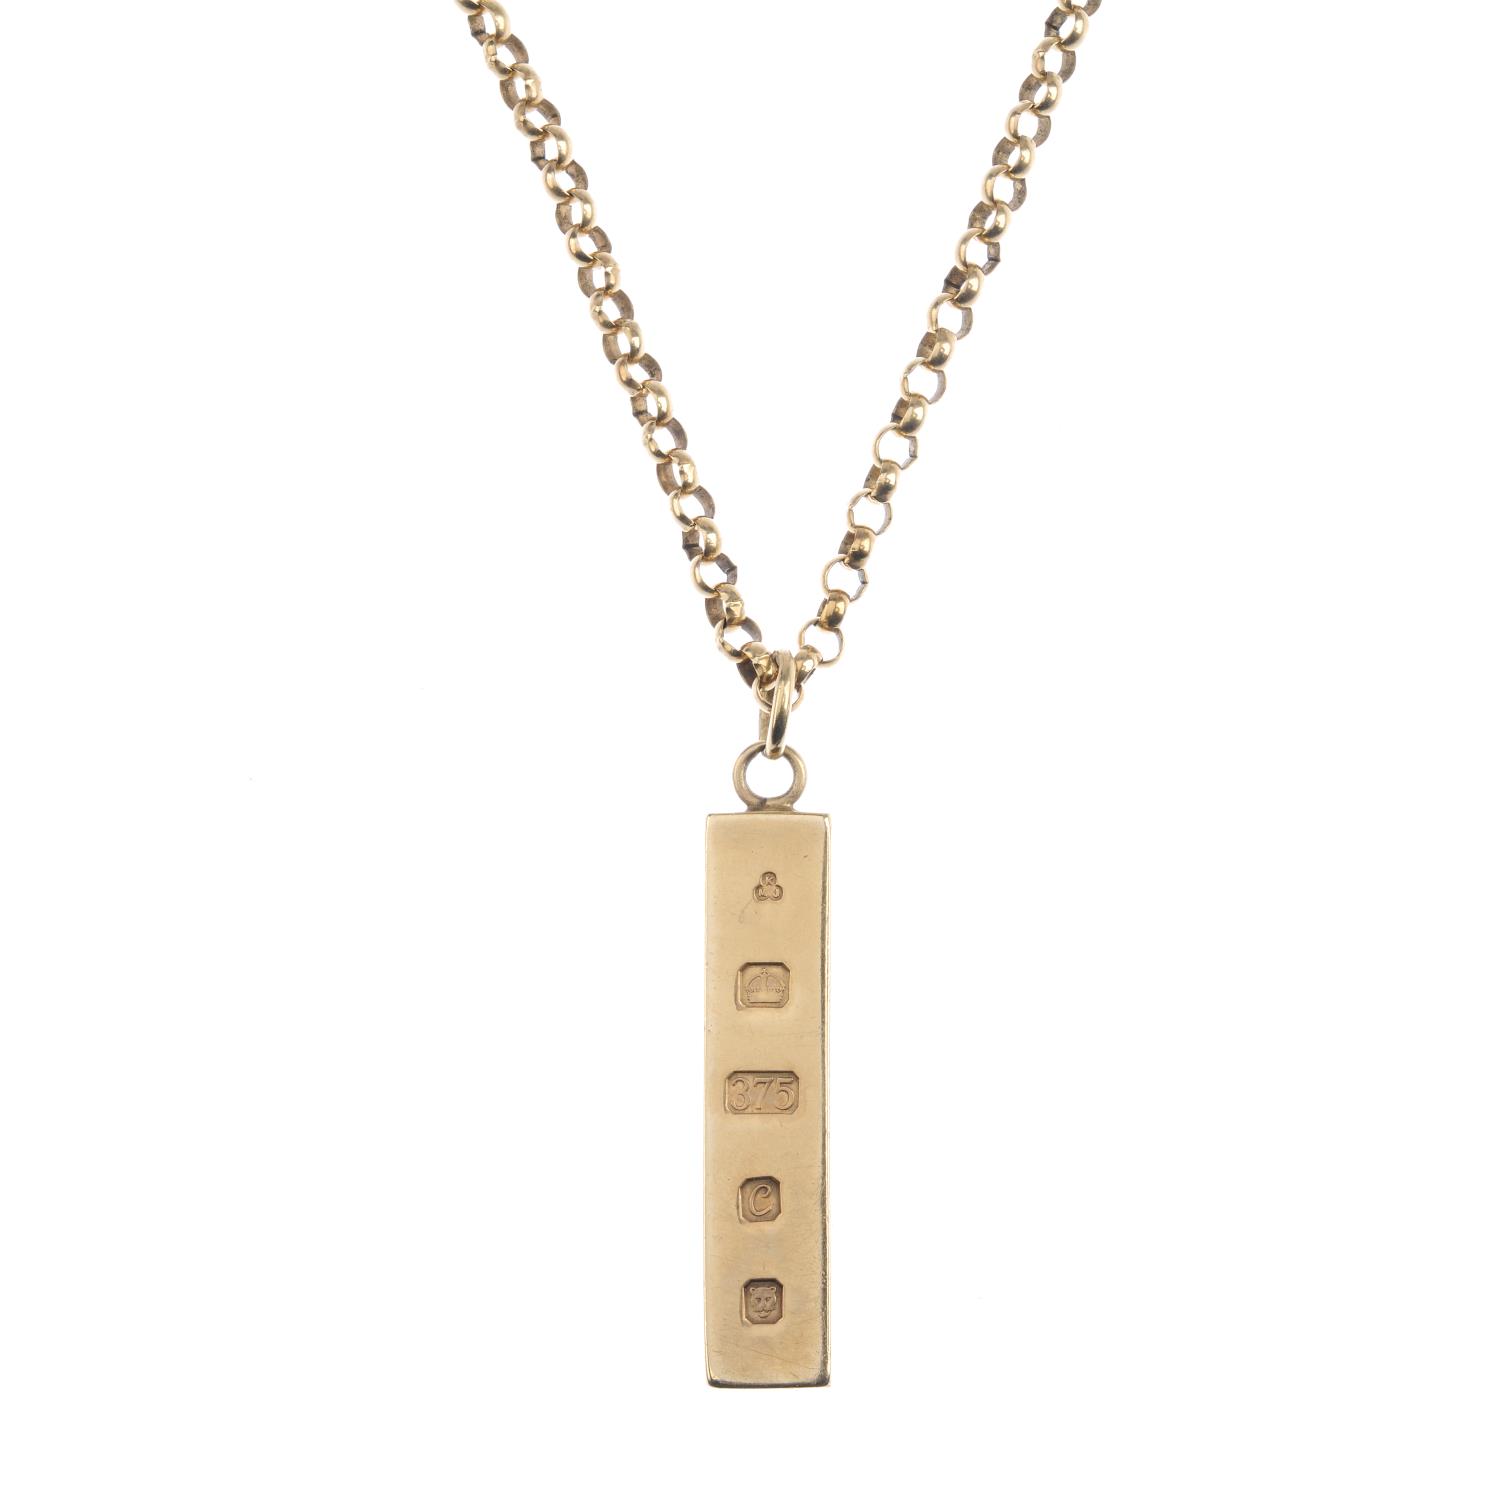 (52407) A 9ct gold pendant, with chain. Designed as a rectangular ingot bar, suspended from a